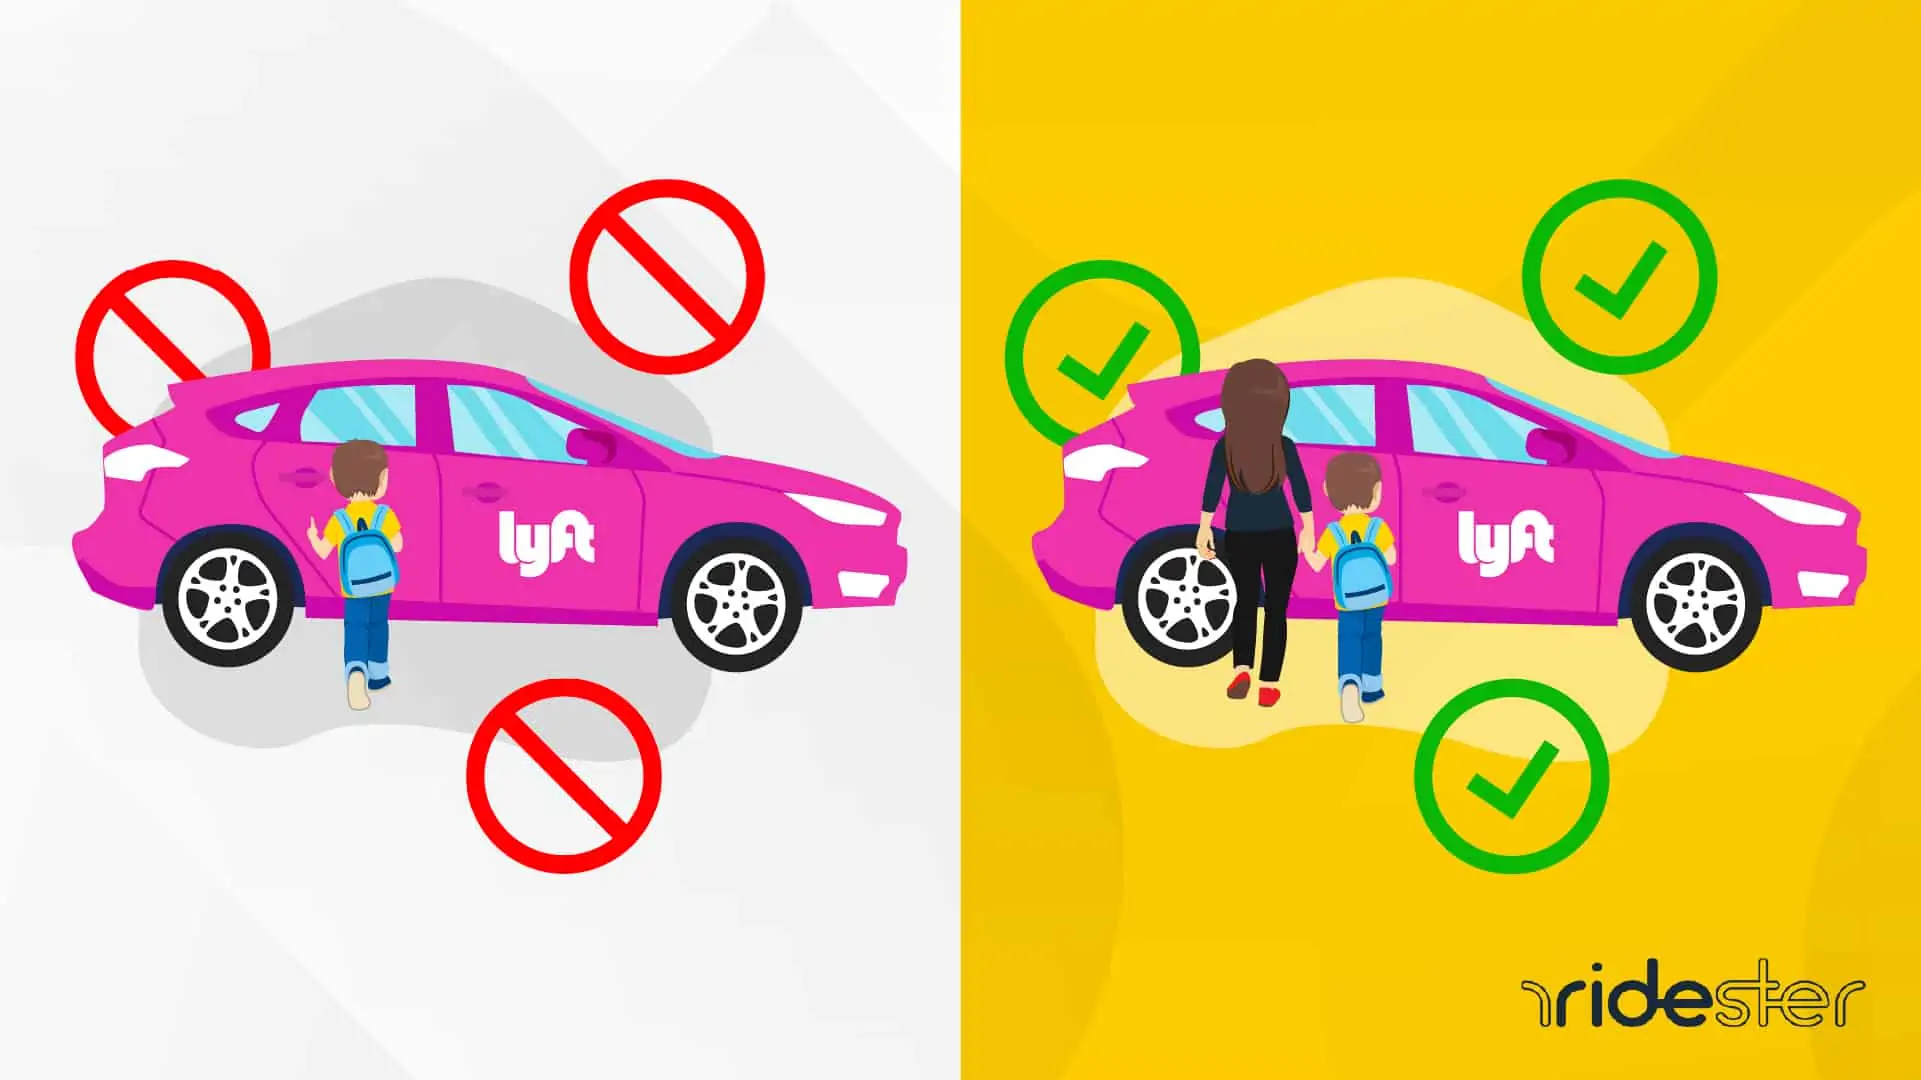 screenshot showing an illustration of the Lyft minor policy - a kid trying to get into a car and it not being allowed and a mother and child riding and it is allowed